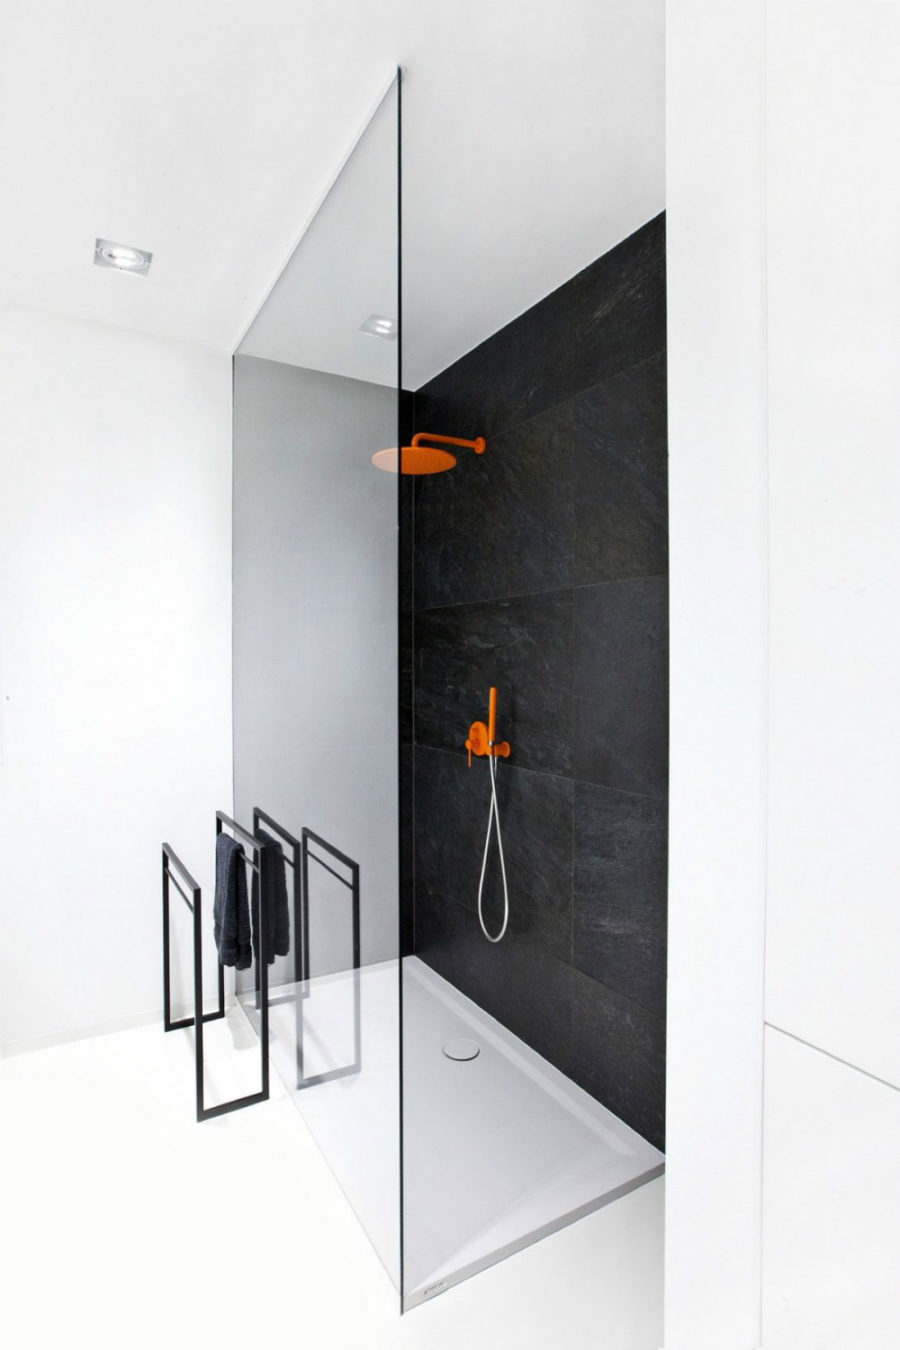 Black shower wall works beautifully with white floors and interior